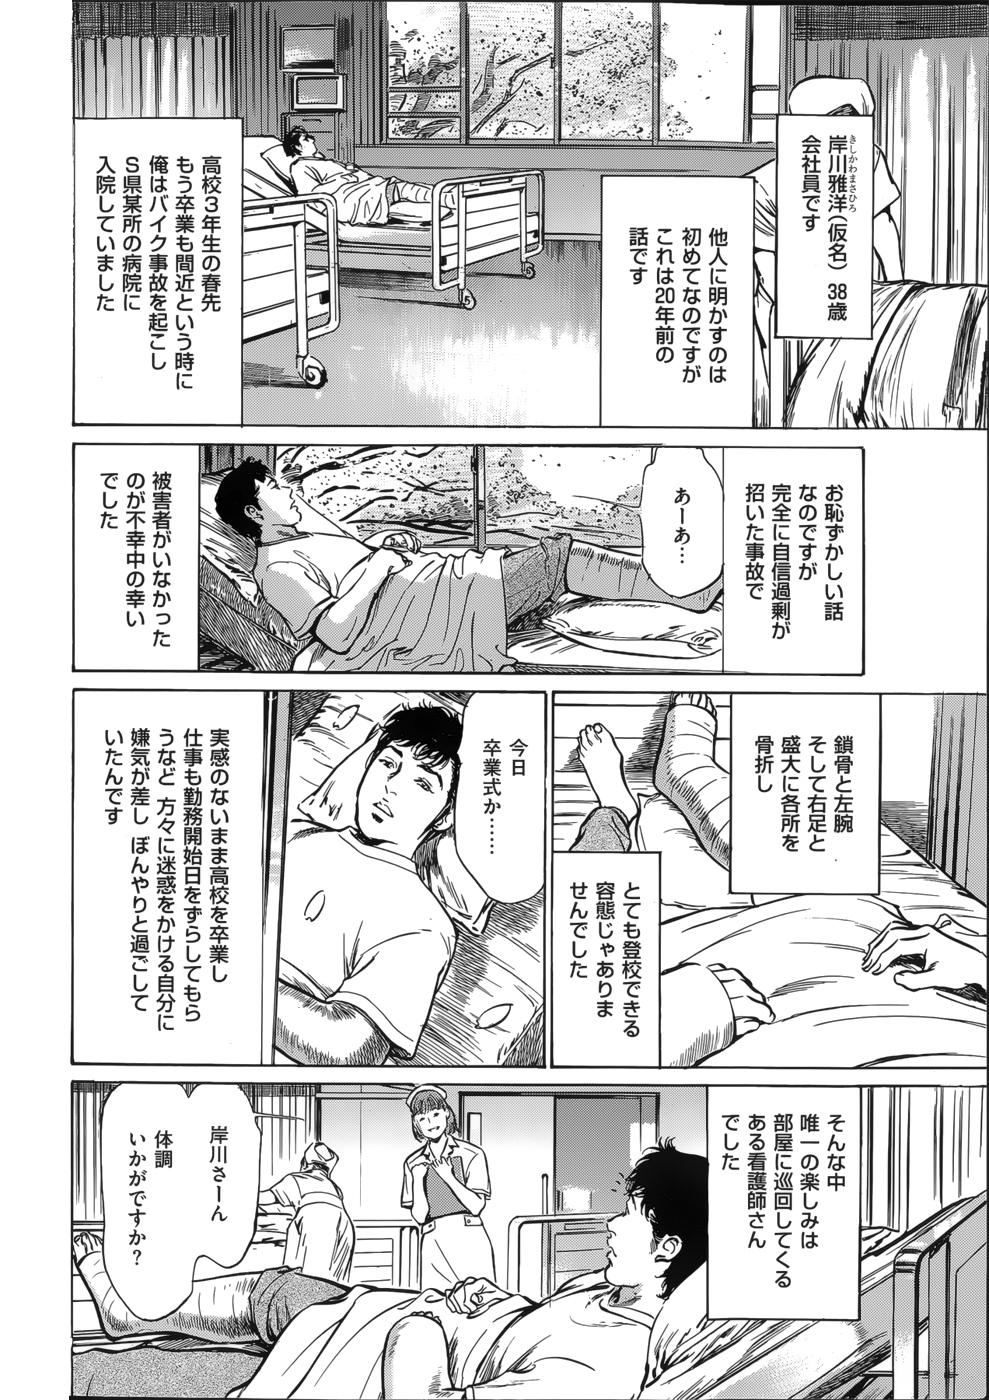 Office たまらない話 Ch.6-8 Fat Ass - Picture 2